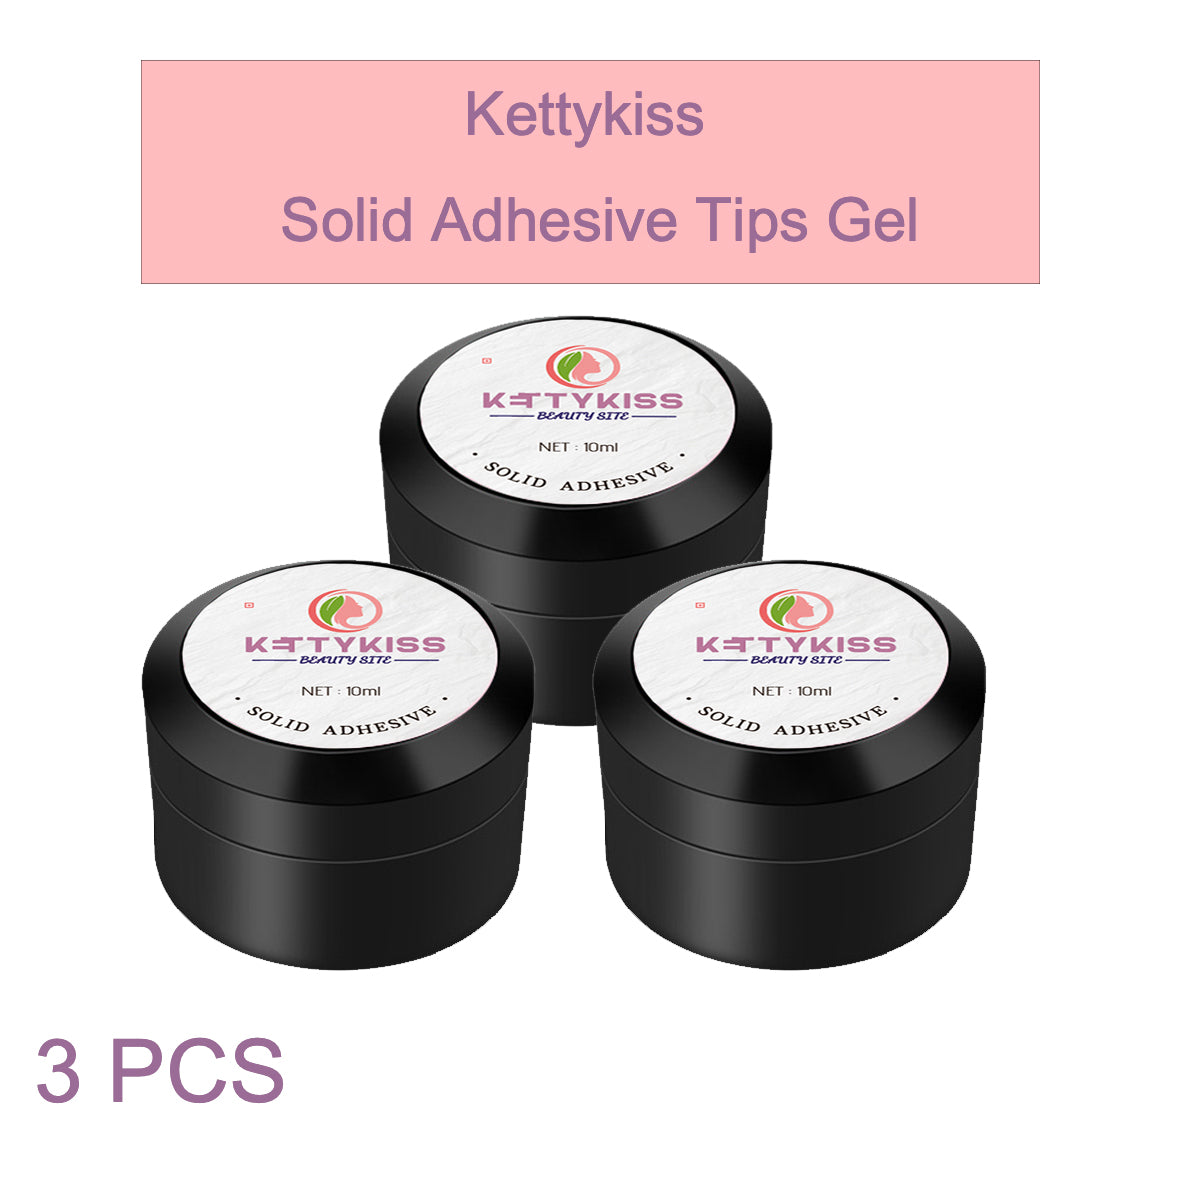 Solid Magic Kettykiss Solid Adhesive Tip Gel